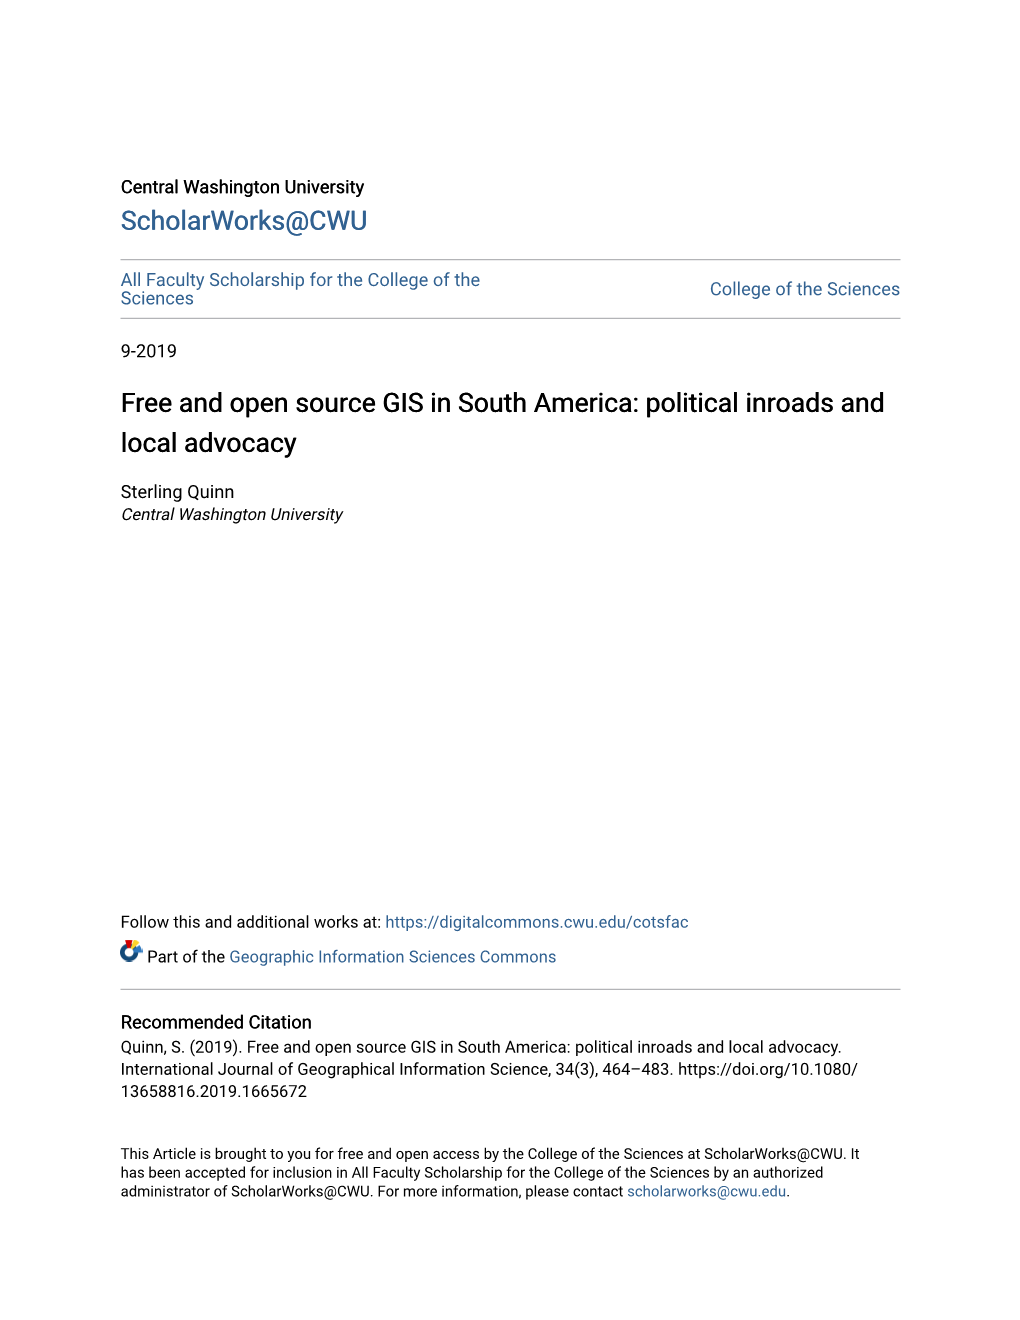 Free and Open Source GIS in South America: Political Inroads and Local Advocacy